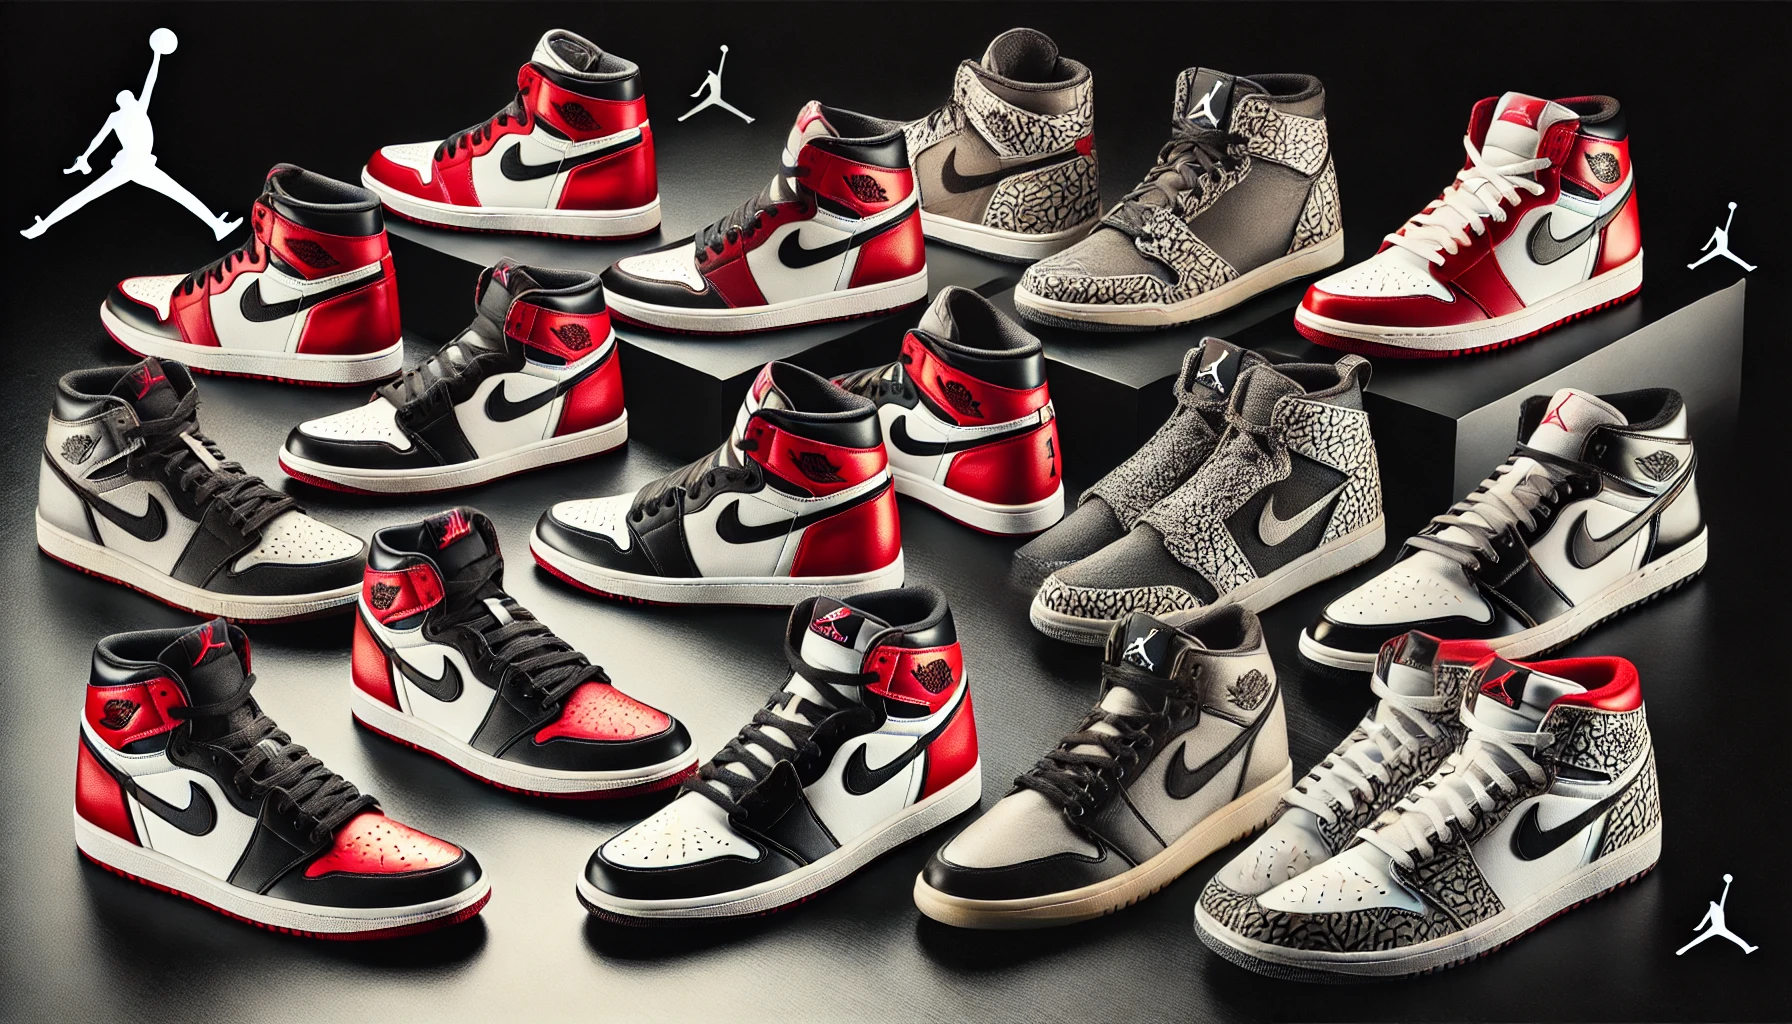 The Most Popular Jordans: A Journey Through Iconic Sneakers